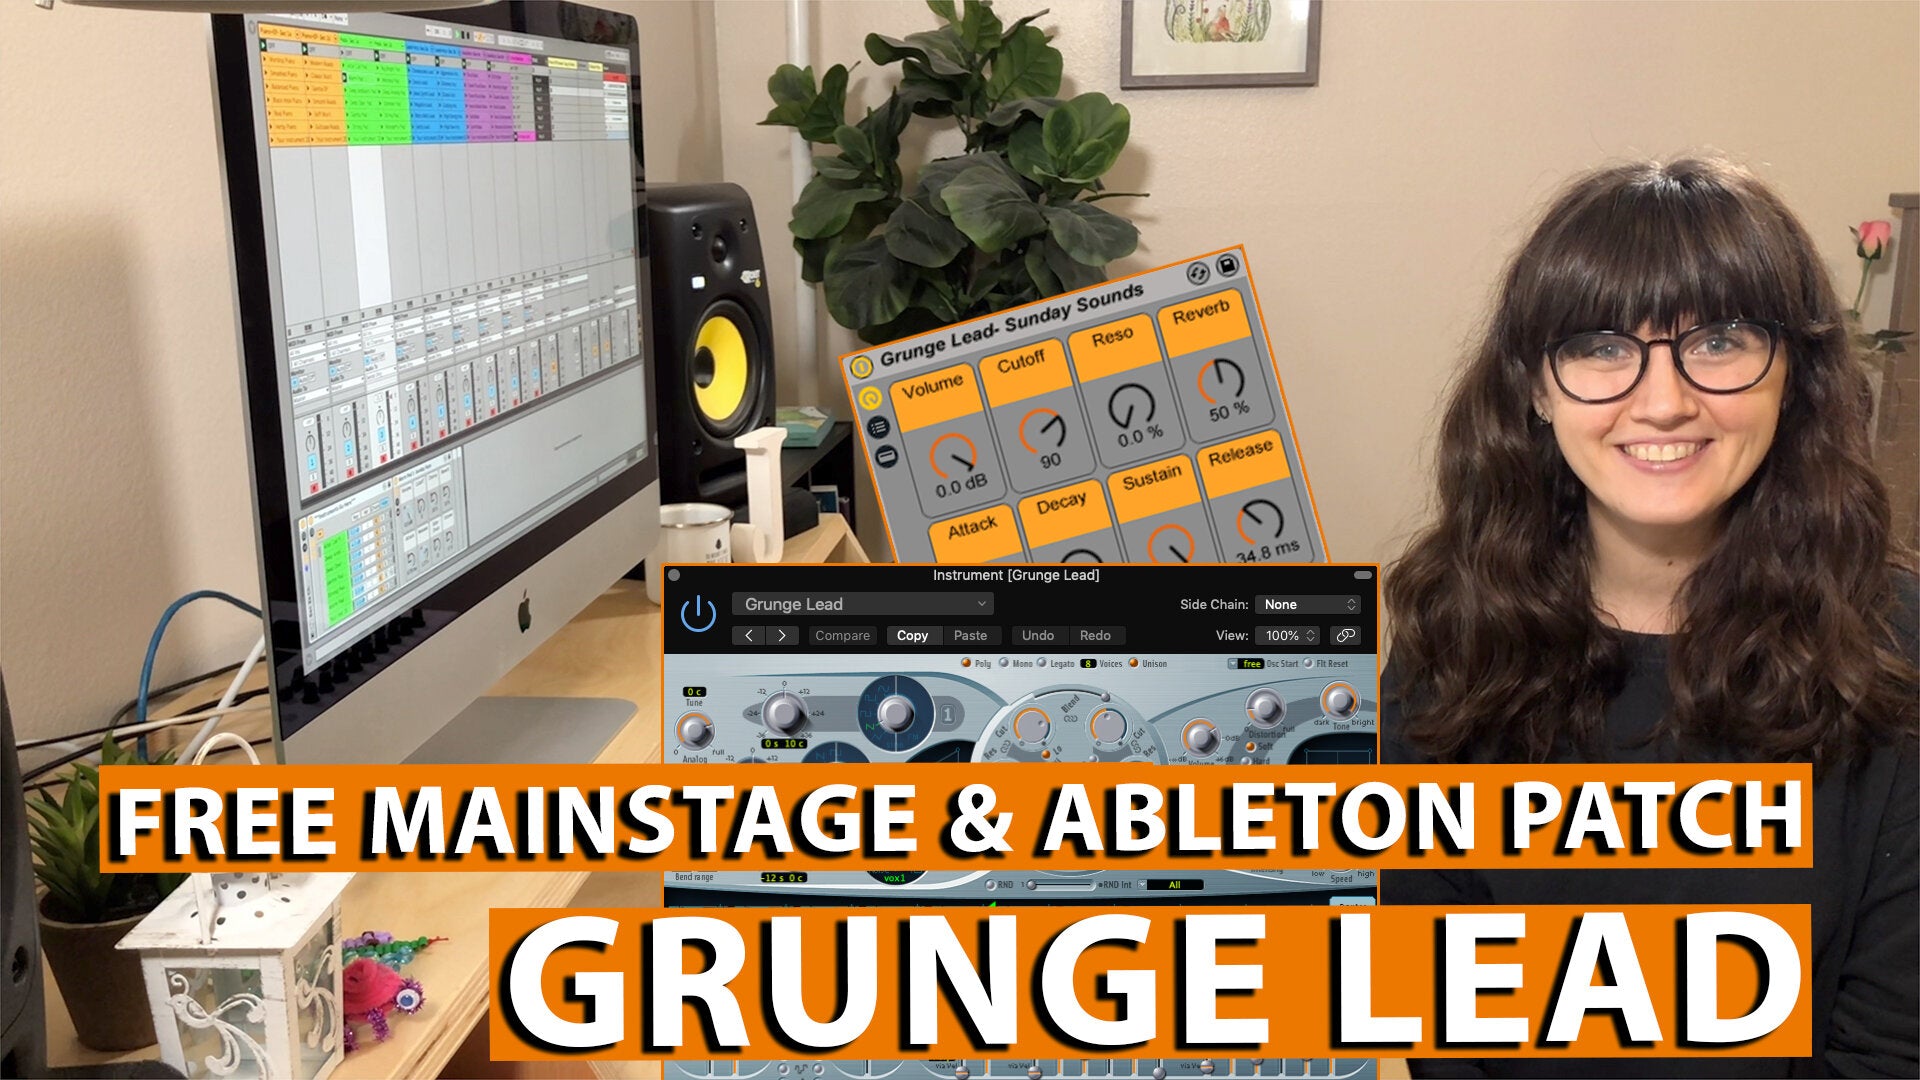 Free MainStage & Ableton Worship Patch! - Grunge Lead